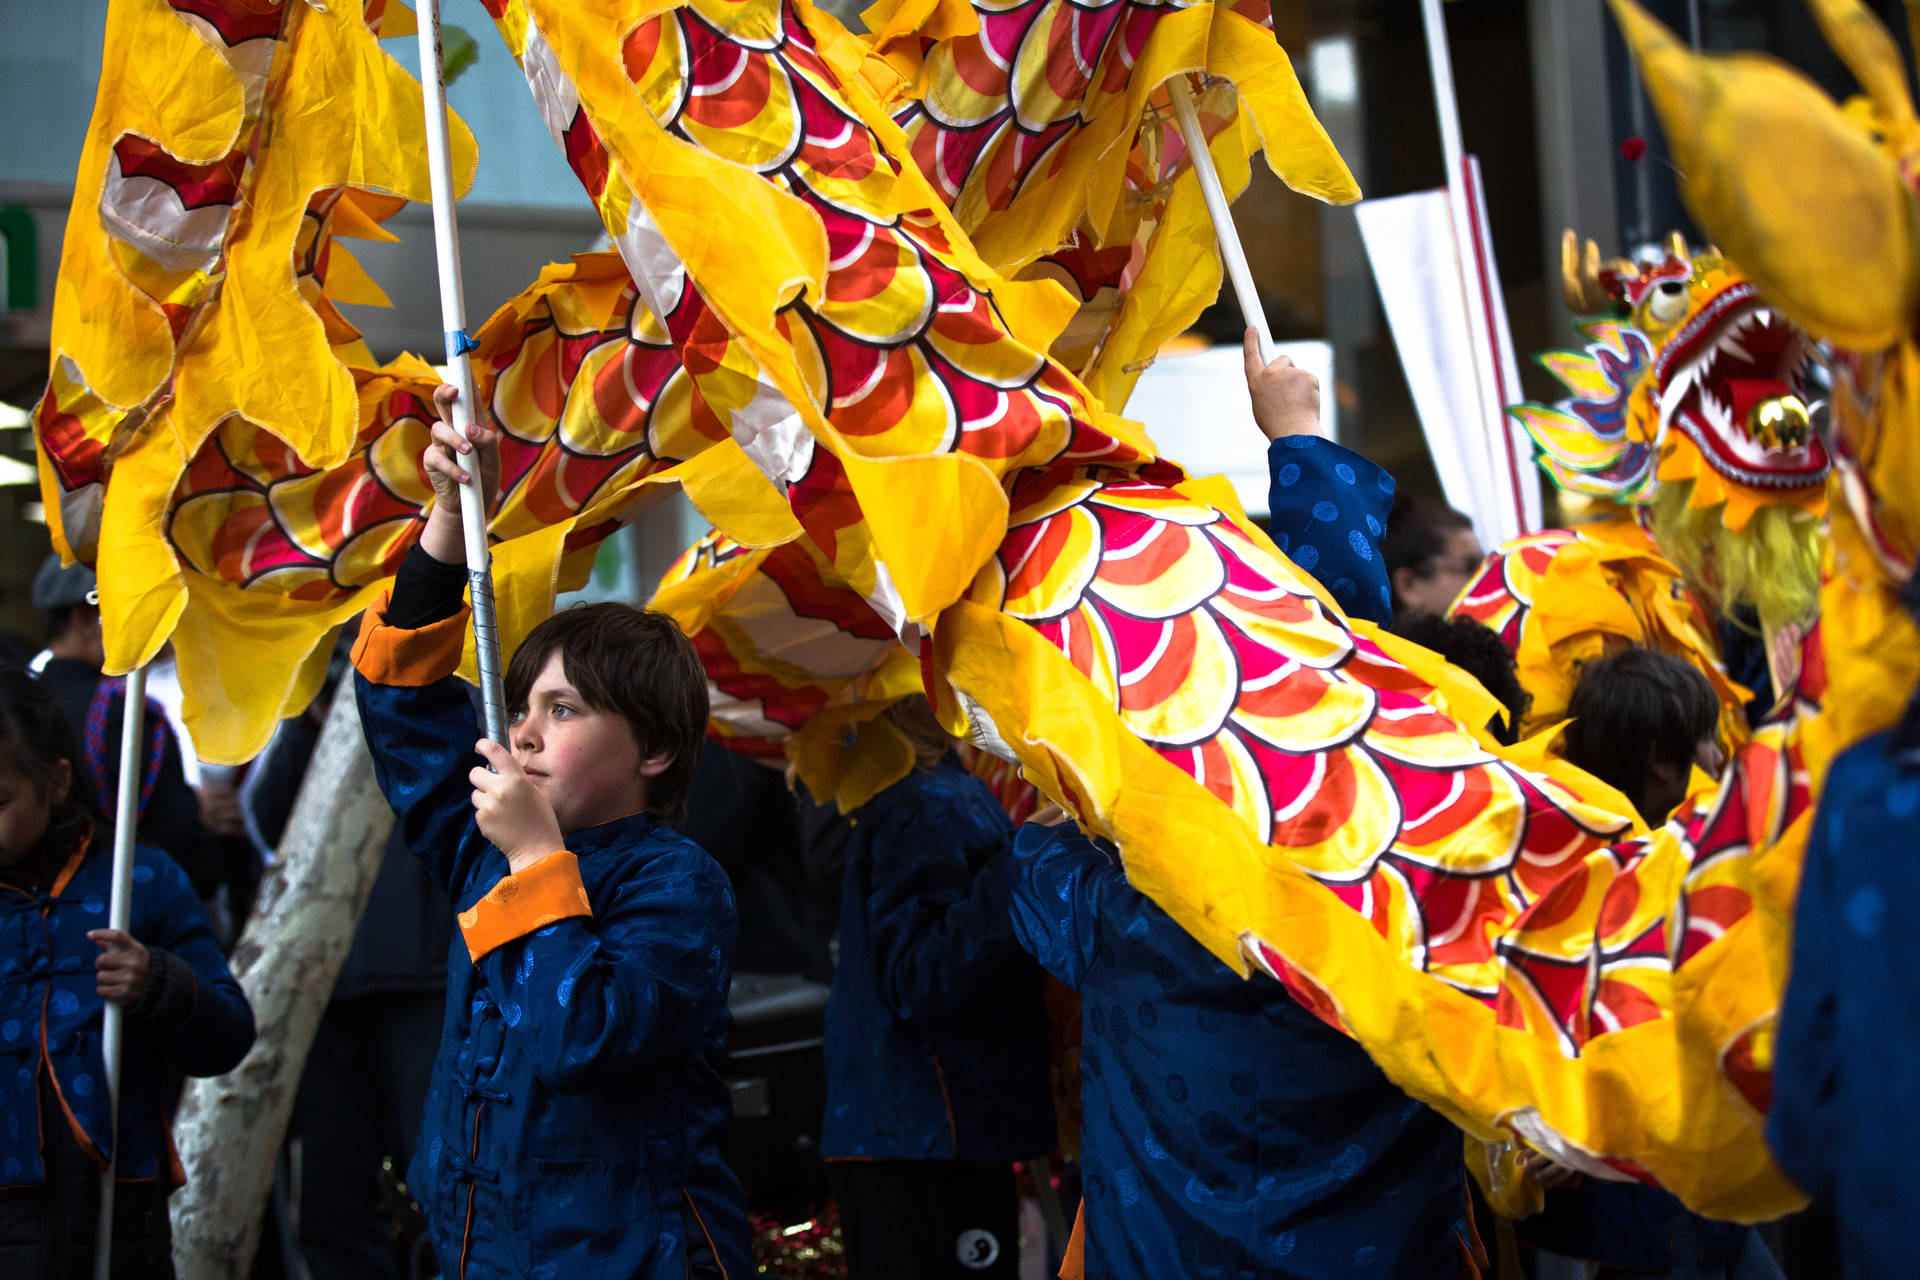 The Lunar New Year Parade kicked off on February 24, 2018 in celebration of the start of a new lunar calendar. The parade has taken place in San Francisco since the 18th century and is the largest celebration of Asian culture outside of Asia. Samantha Shanahan/KQED